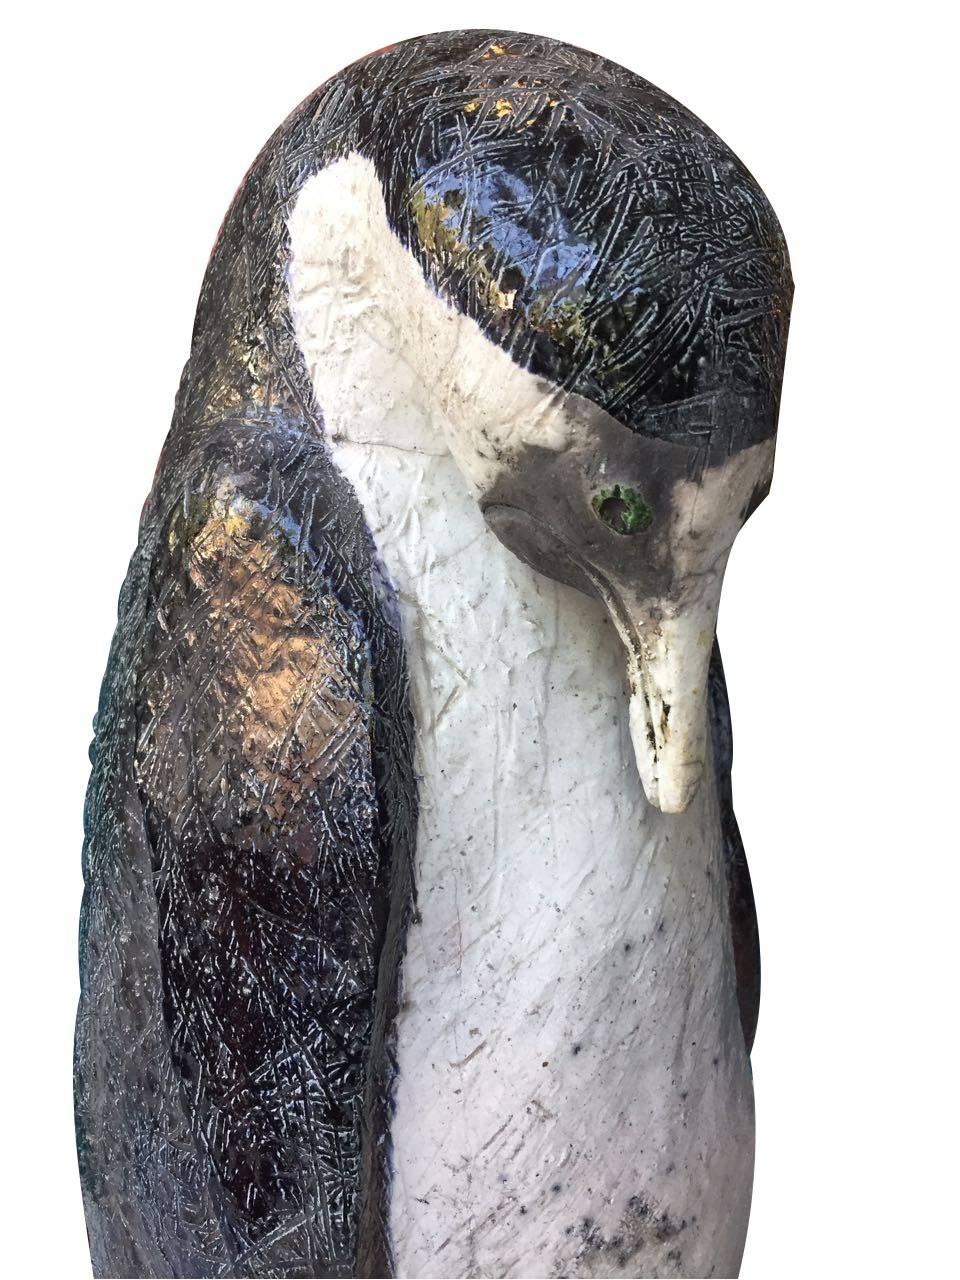 Beautiful penguin sculpture with irregular enamel finish, almost covered in black and white, green eyes. Presents a crack in the lower part (part of the creation process). Anonymous.